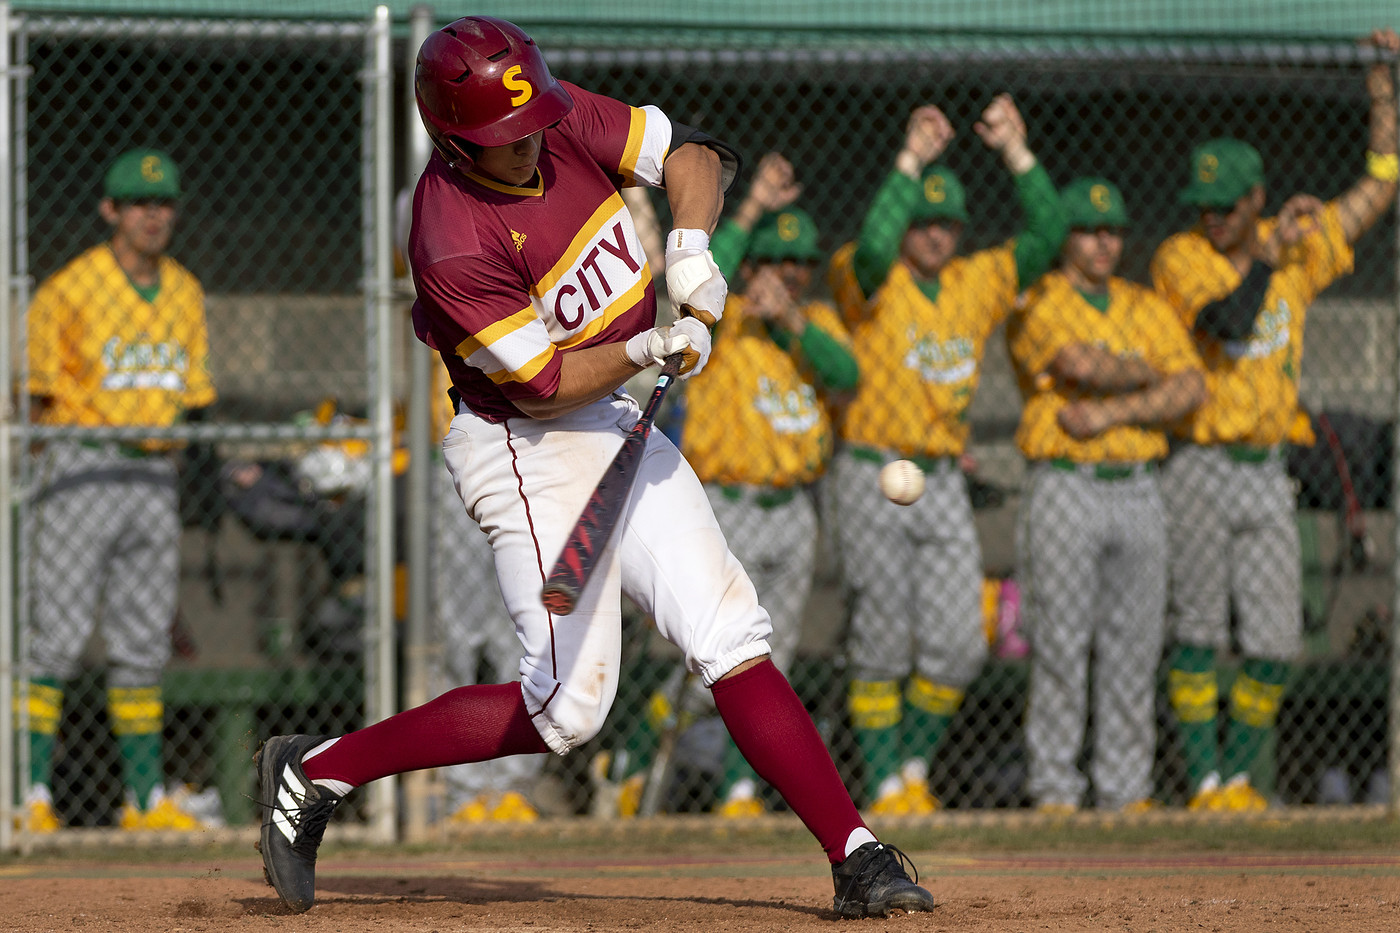 The Golden Eagles split their season series with the Panthers by taking Saturday's game 4-1; City held to just 3 hits